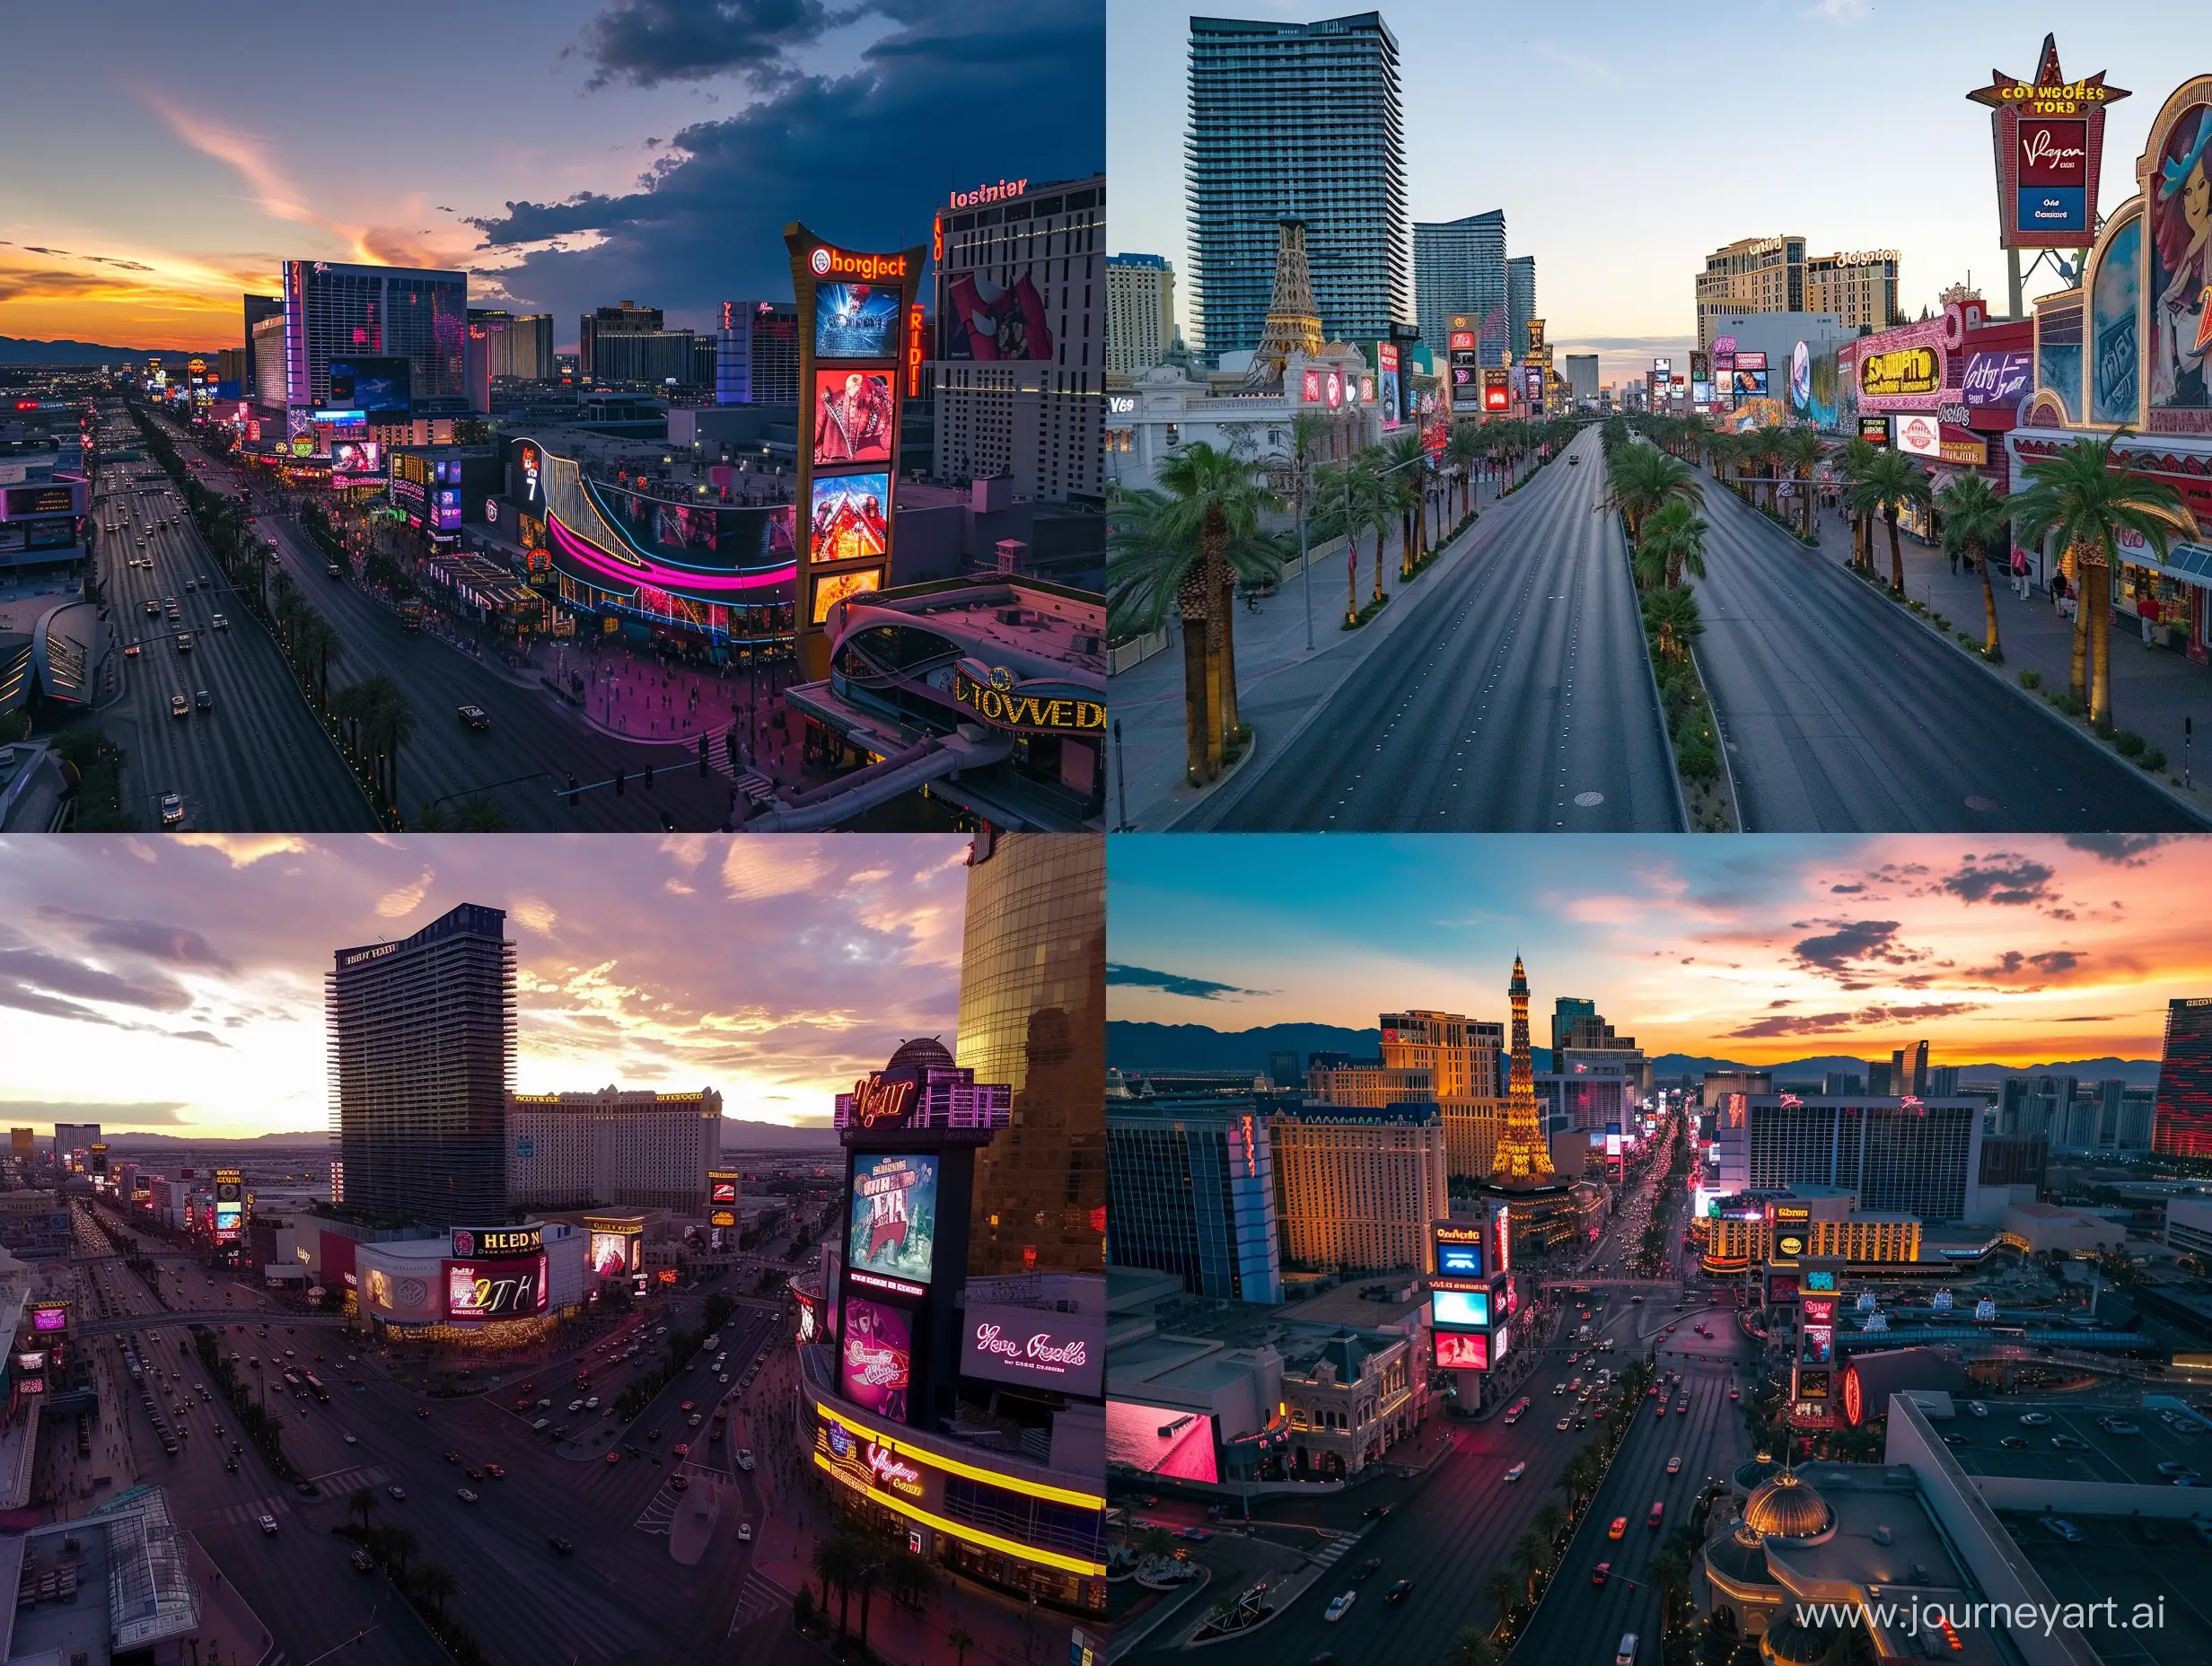 Aerial-View-of-Vibrant-Las-Vegas-Skyline-with-Billboards-and-Stores